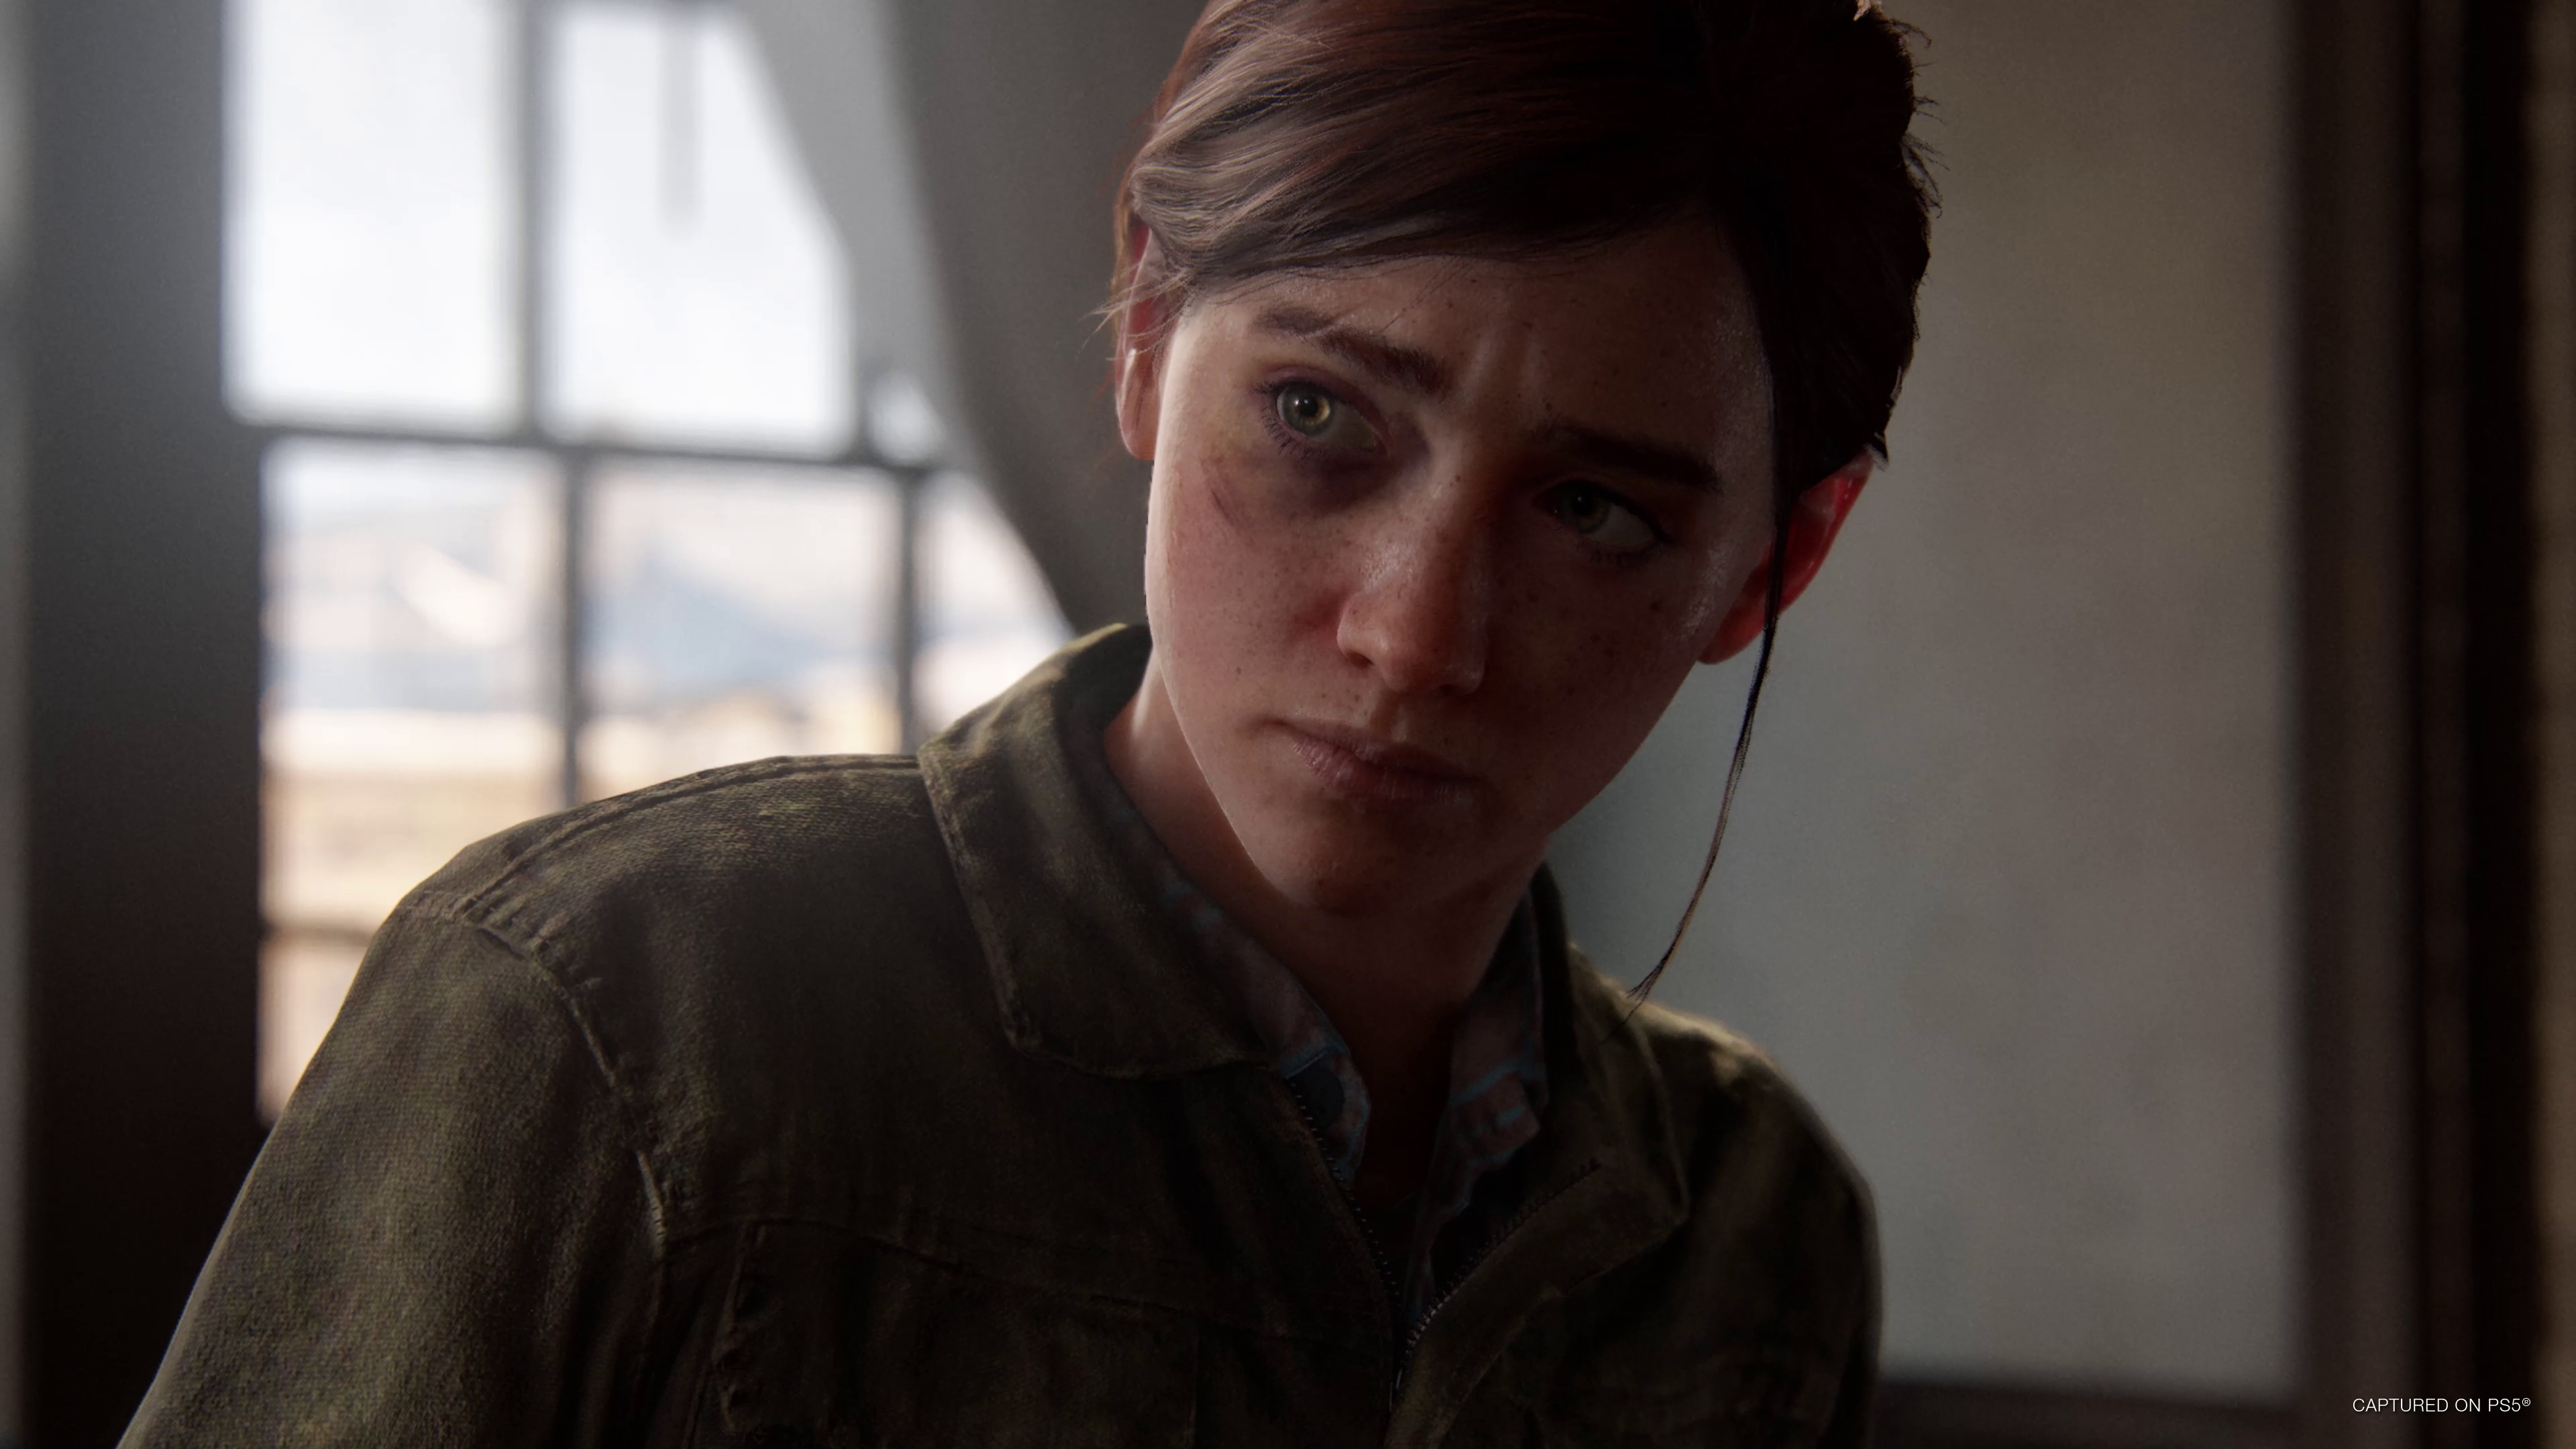 New 'The Last of Us Part 3' Details Reveal New Characters, Ellie's Return,  Plus More